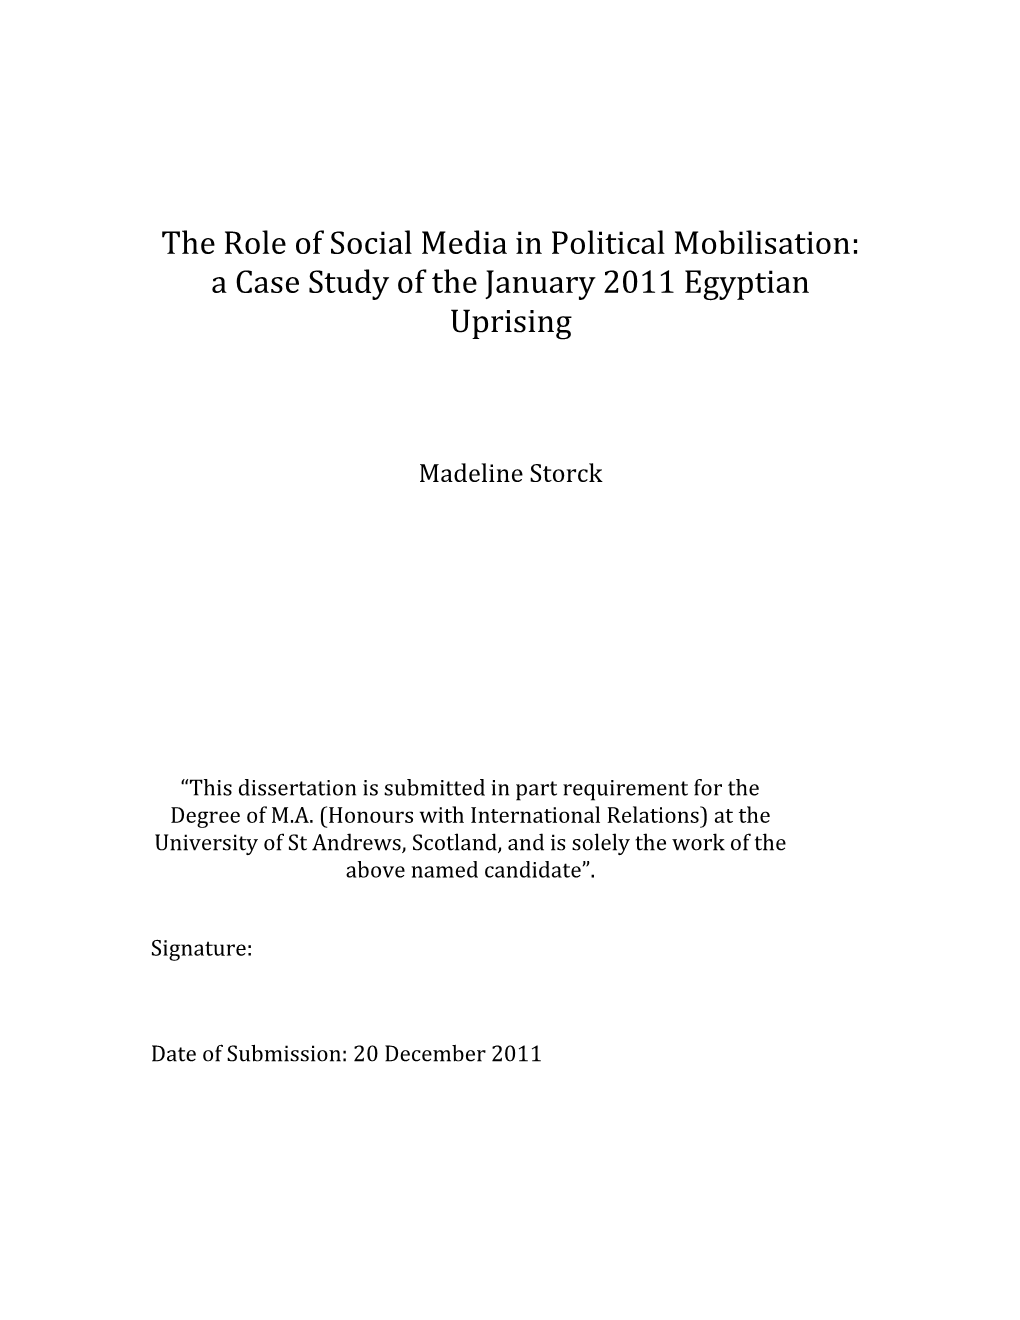 The Role of Social Media in Political Mobilisation: a Case Study of the January 2011 Egyptian Uprising